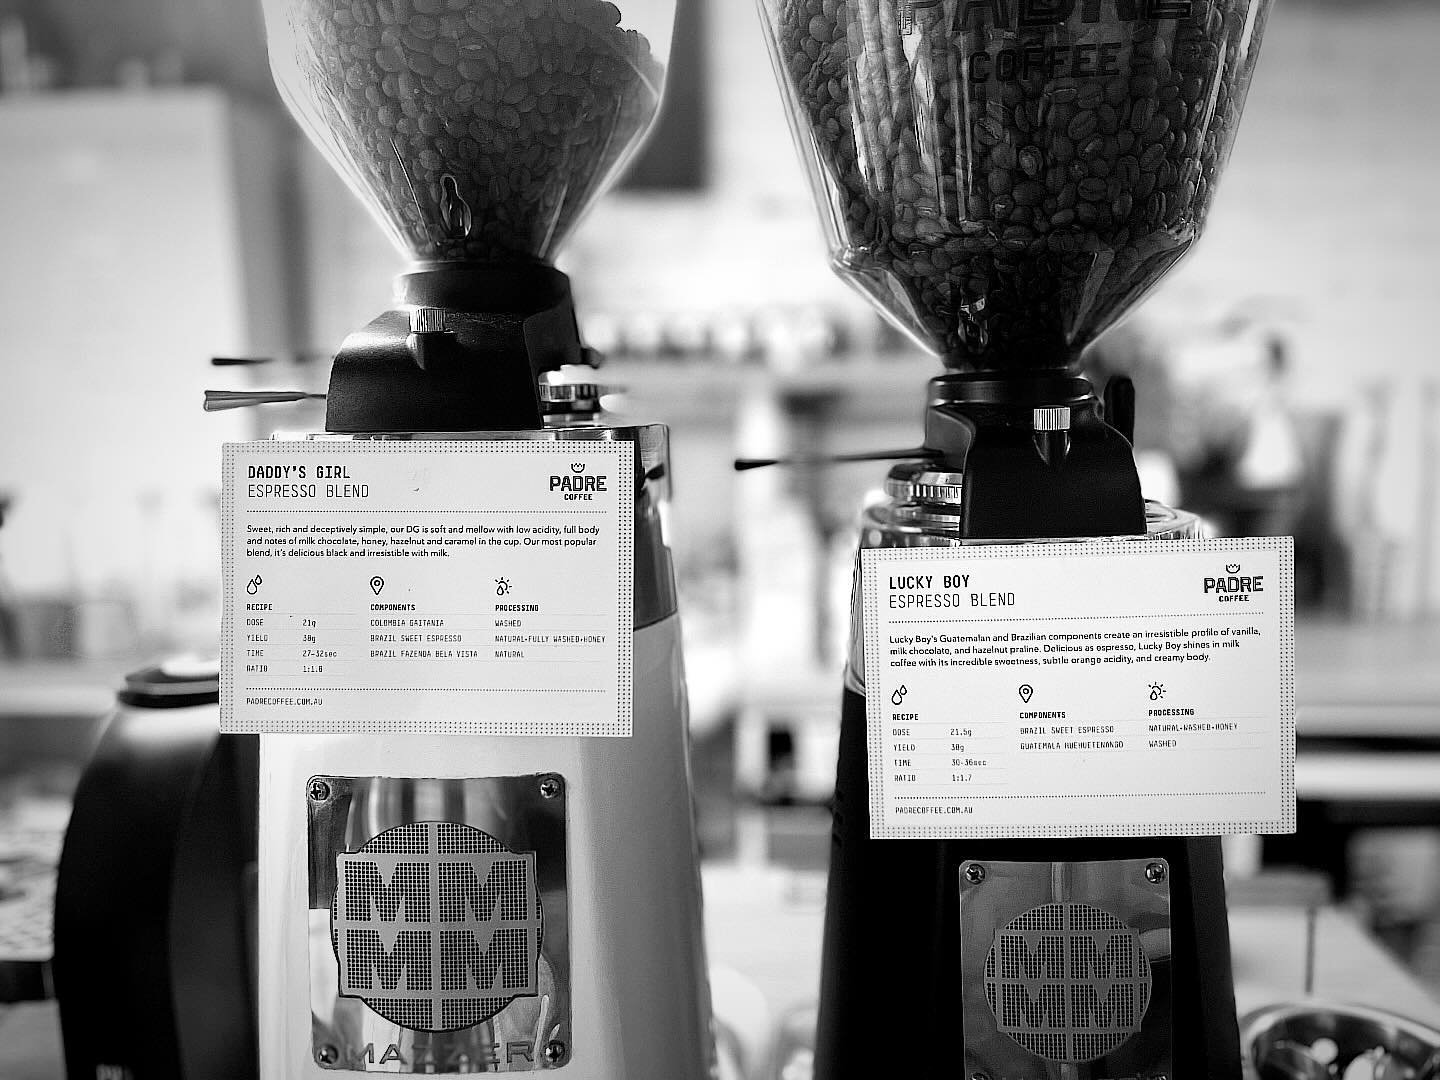 Are you a lucky boy? 🧒 Or are you a daddy&rsquo;s girl? 👧 @citizen_cafe_ @padrecoffee @slayerespresso &hellip; both blends working side by side for a palate of your choice 🙏❤️ #caf&egrave; #coffeeshop #coffeebeans #coffeegram #coffeelife #coffeebl